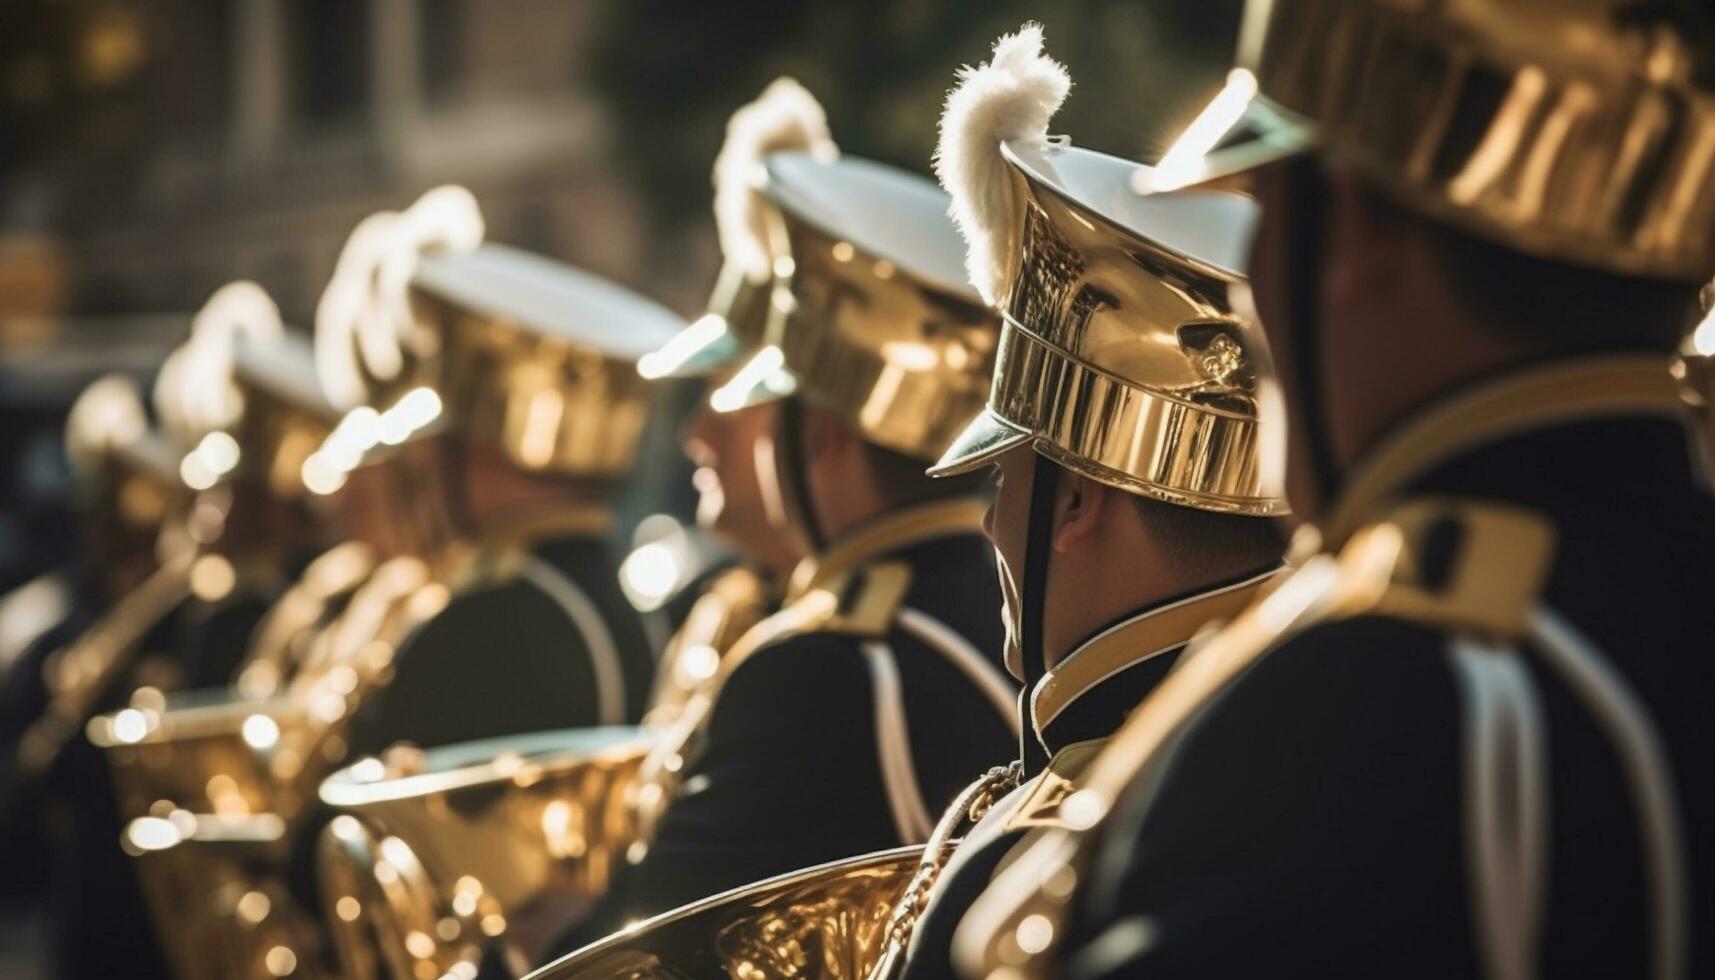 Men in military uniforms parade with brass instruments and helmets generated by AI photo